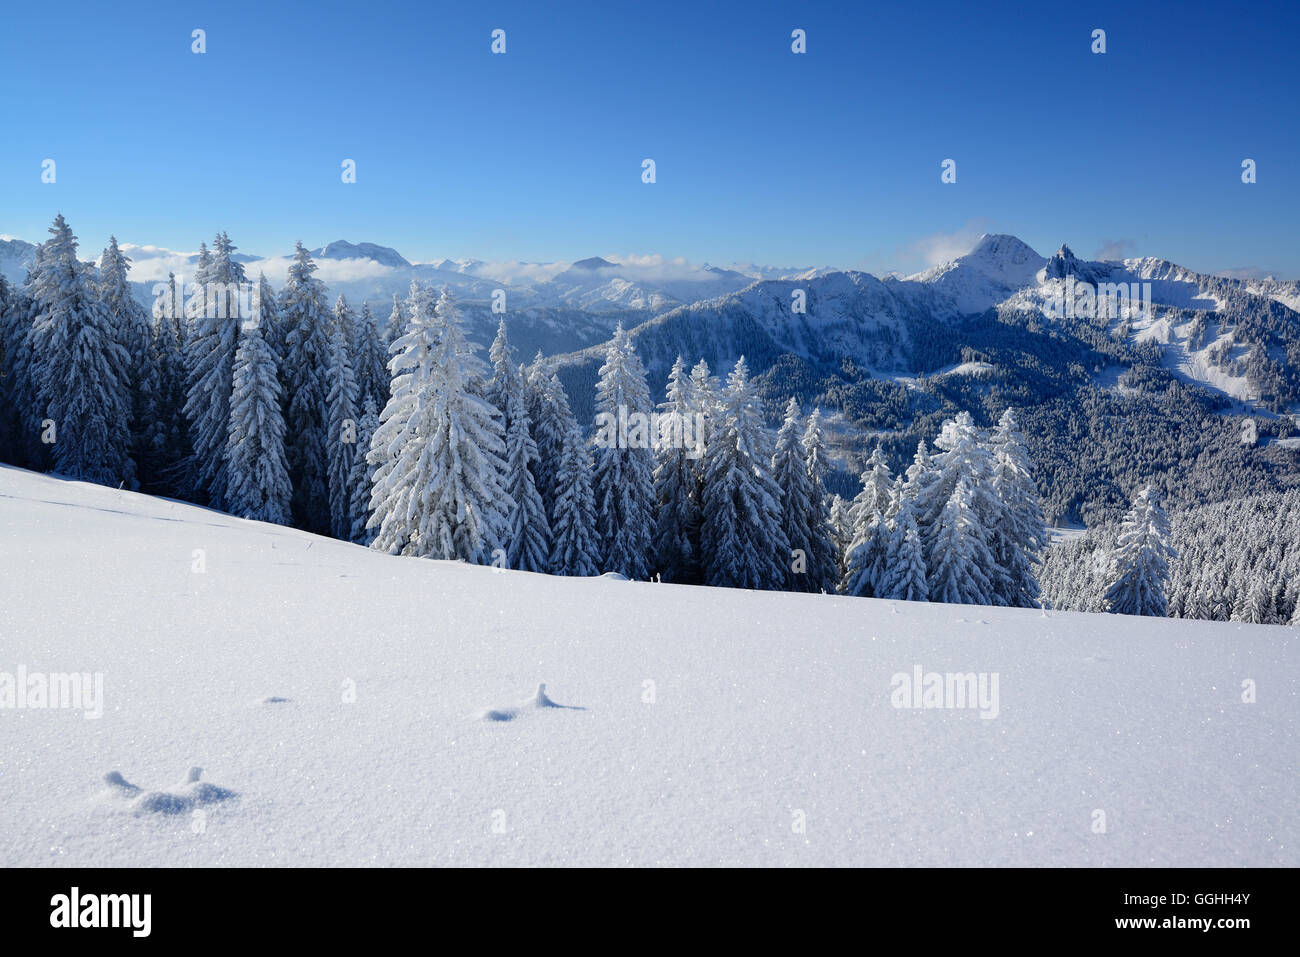 Snow-covered trees in front of mountain scenery, Rosskopf, Bavarian Prealps, Upper Bavaria, Germany Stock Photo